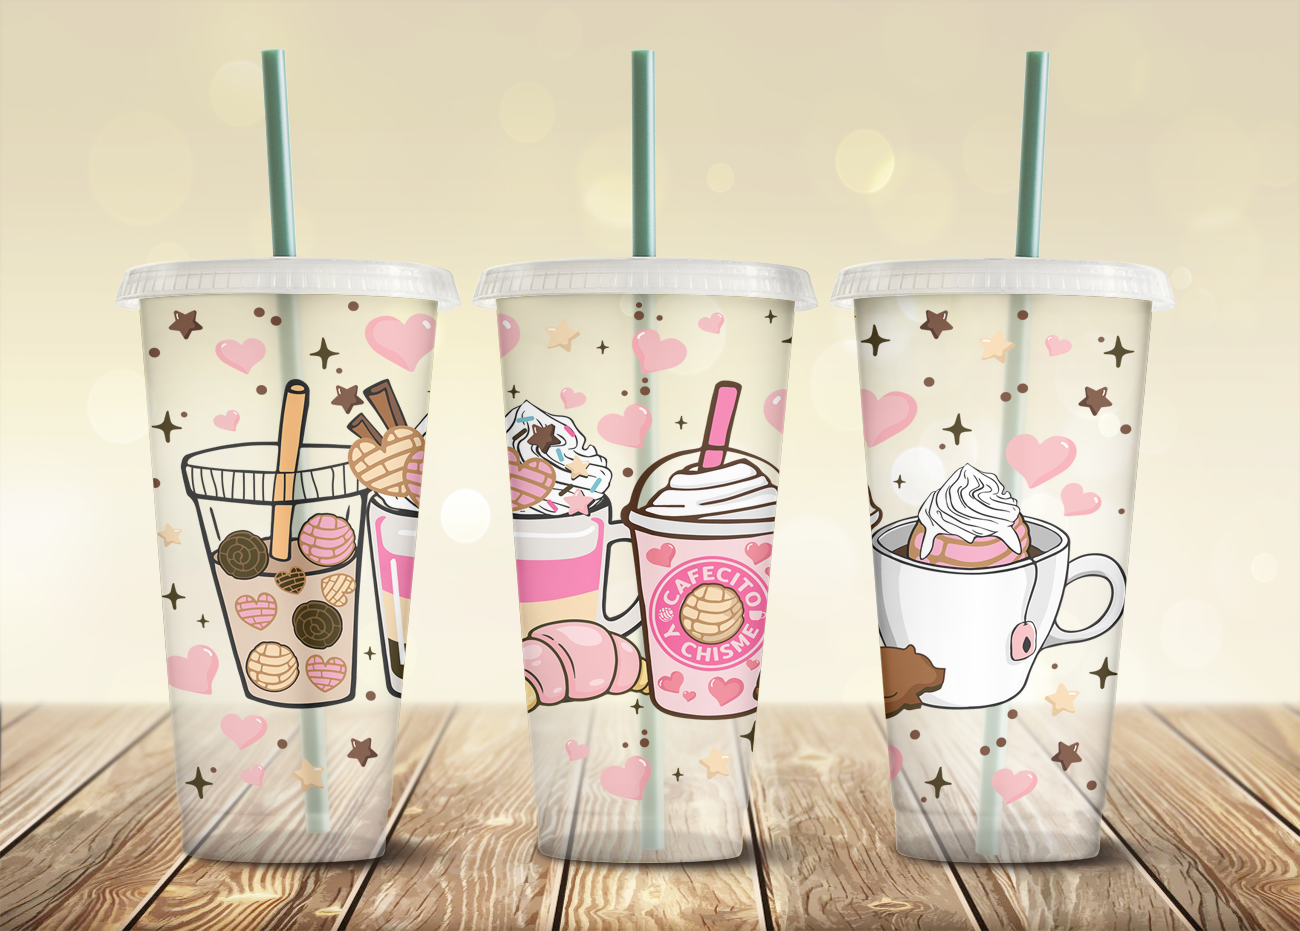 Cafecito Y Chisme Starbucks Cold Cup Ice Coffee Cup Reusable 